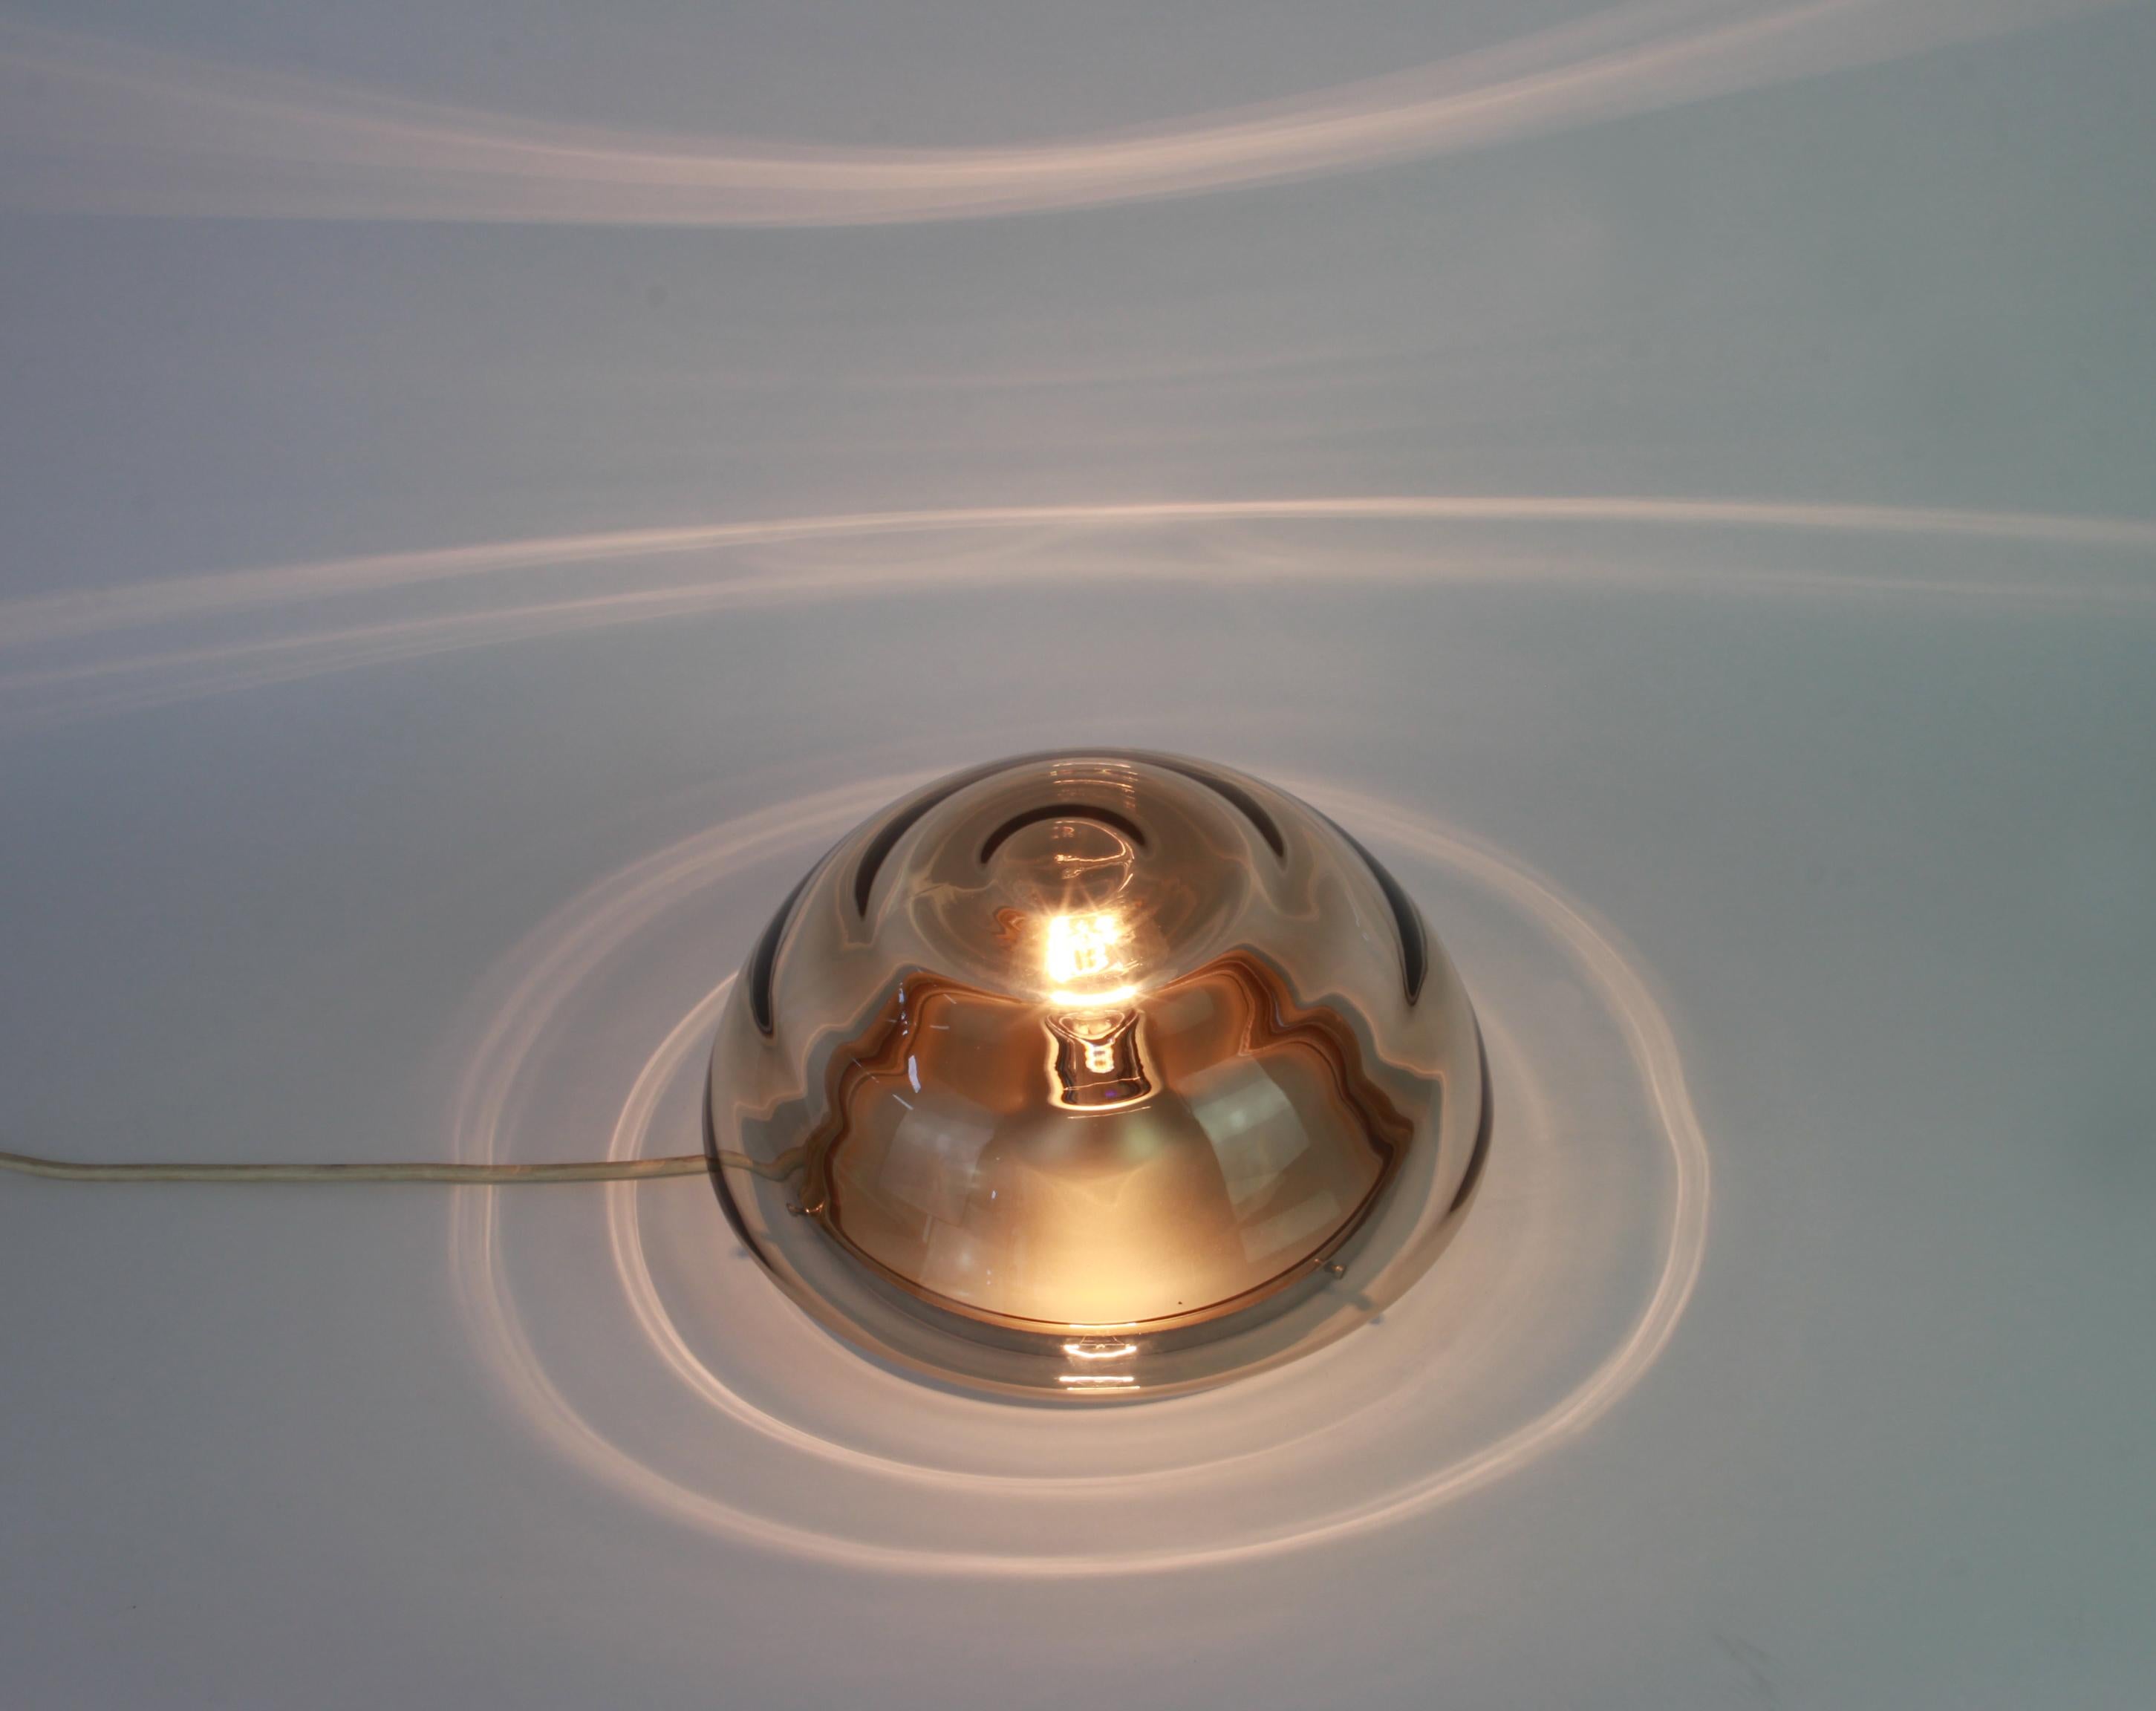 Vintage Sputnik lamp from the 1970s manufactured by Cosack, Germany, 1970s.
This lamp can be used as a ceiling lamp, or as a wall lamp.
Wonderful Murano glass shape.
Sockets: 1 x E27 standard bulb and function on voltage from 110 till 240 volts.